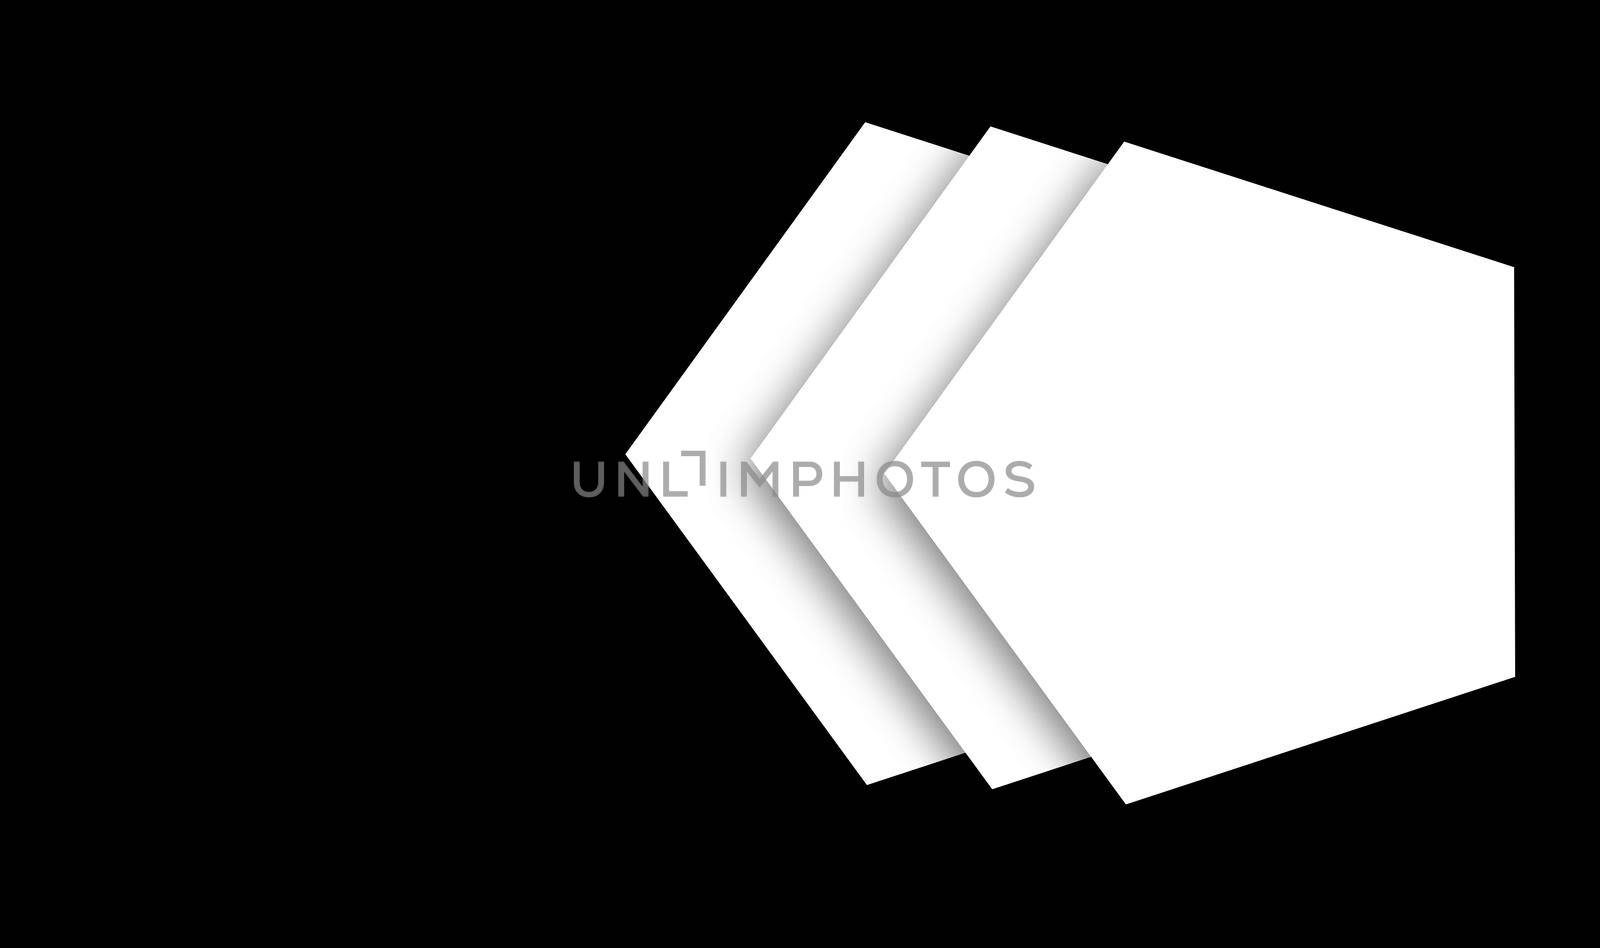 three pentagons overlapping on each other in the black isolated background with soft shadow, layered image ready to print for cards, invitation, design print